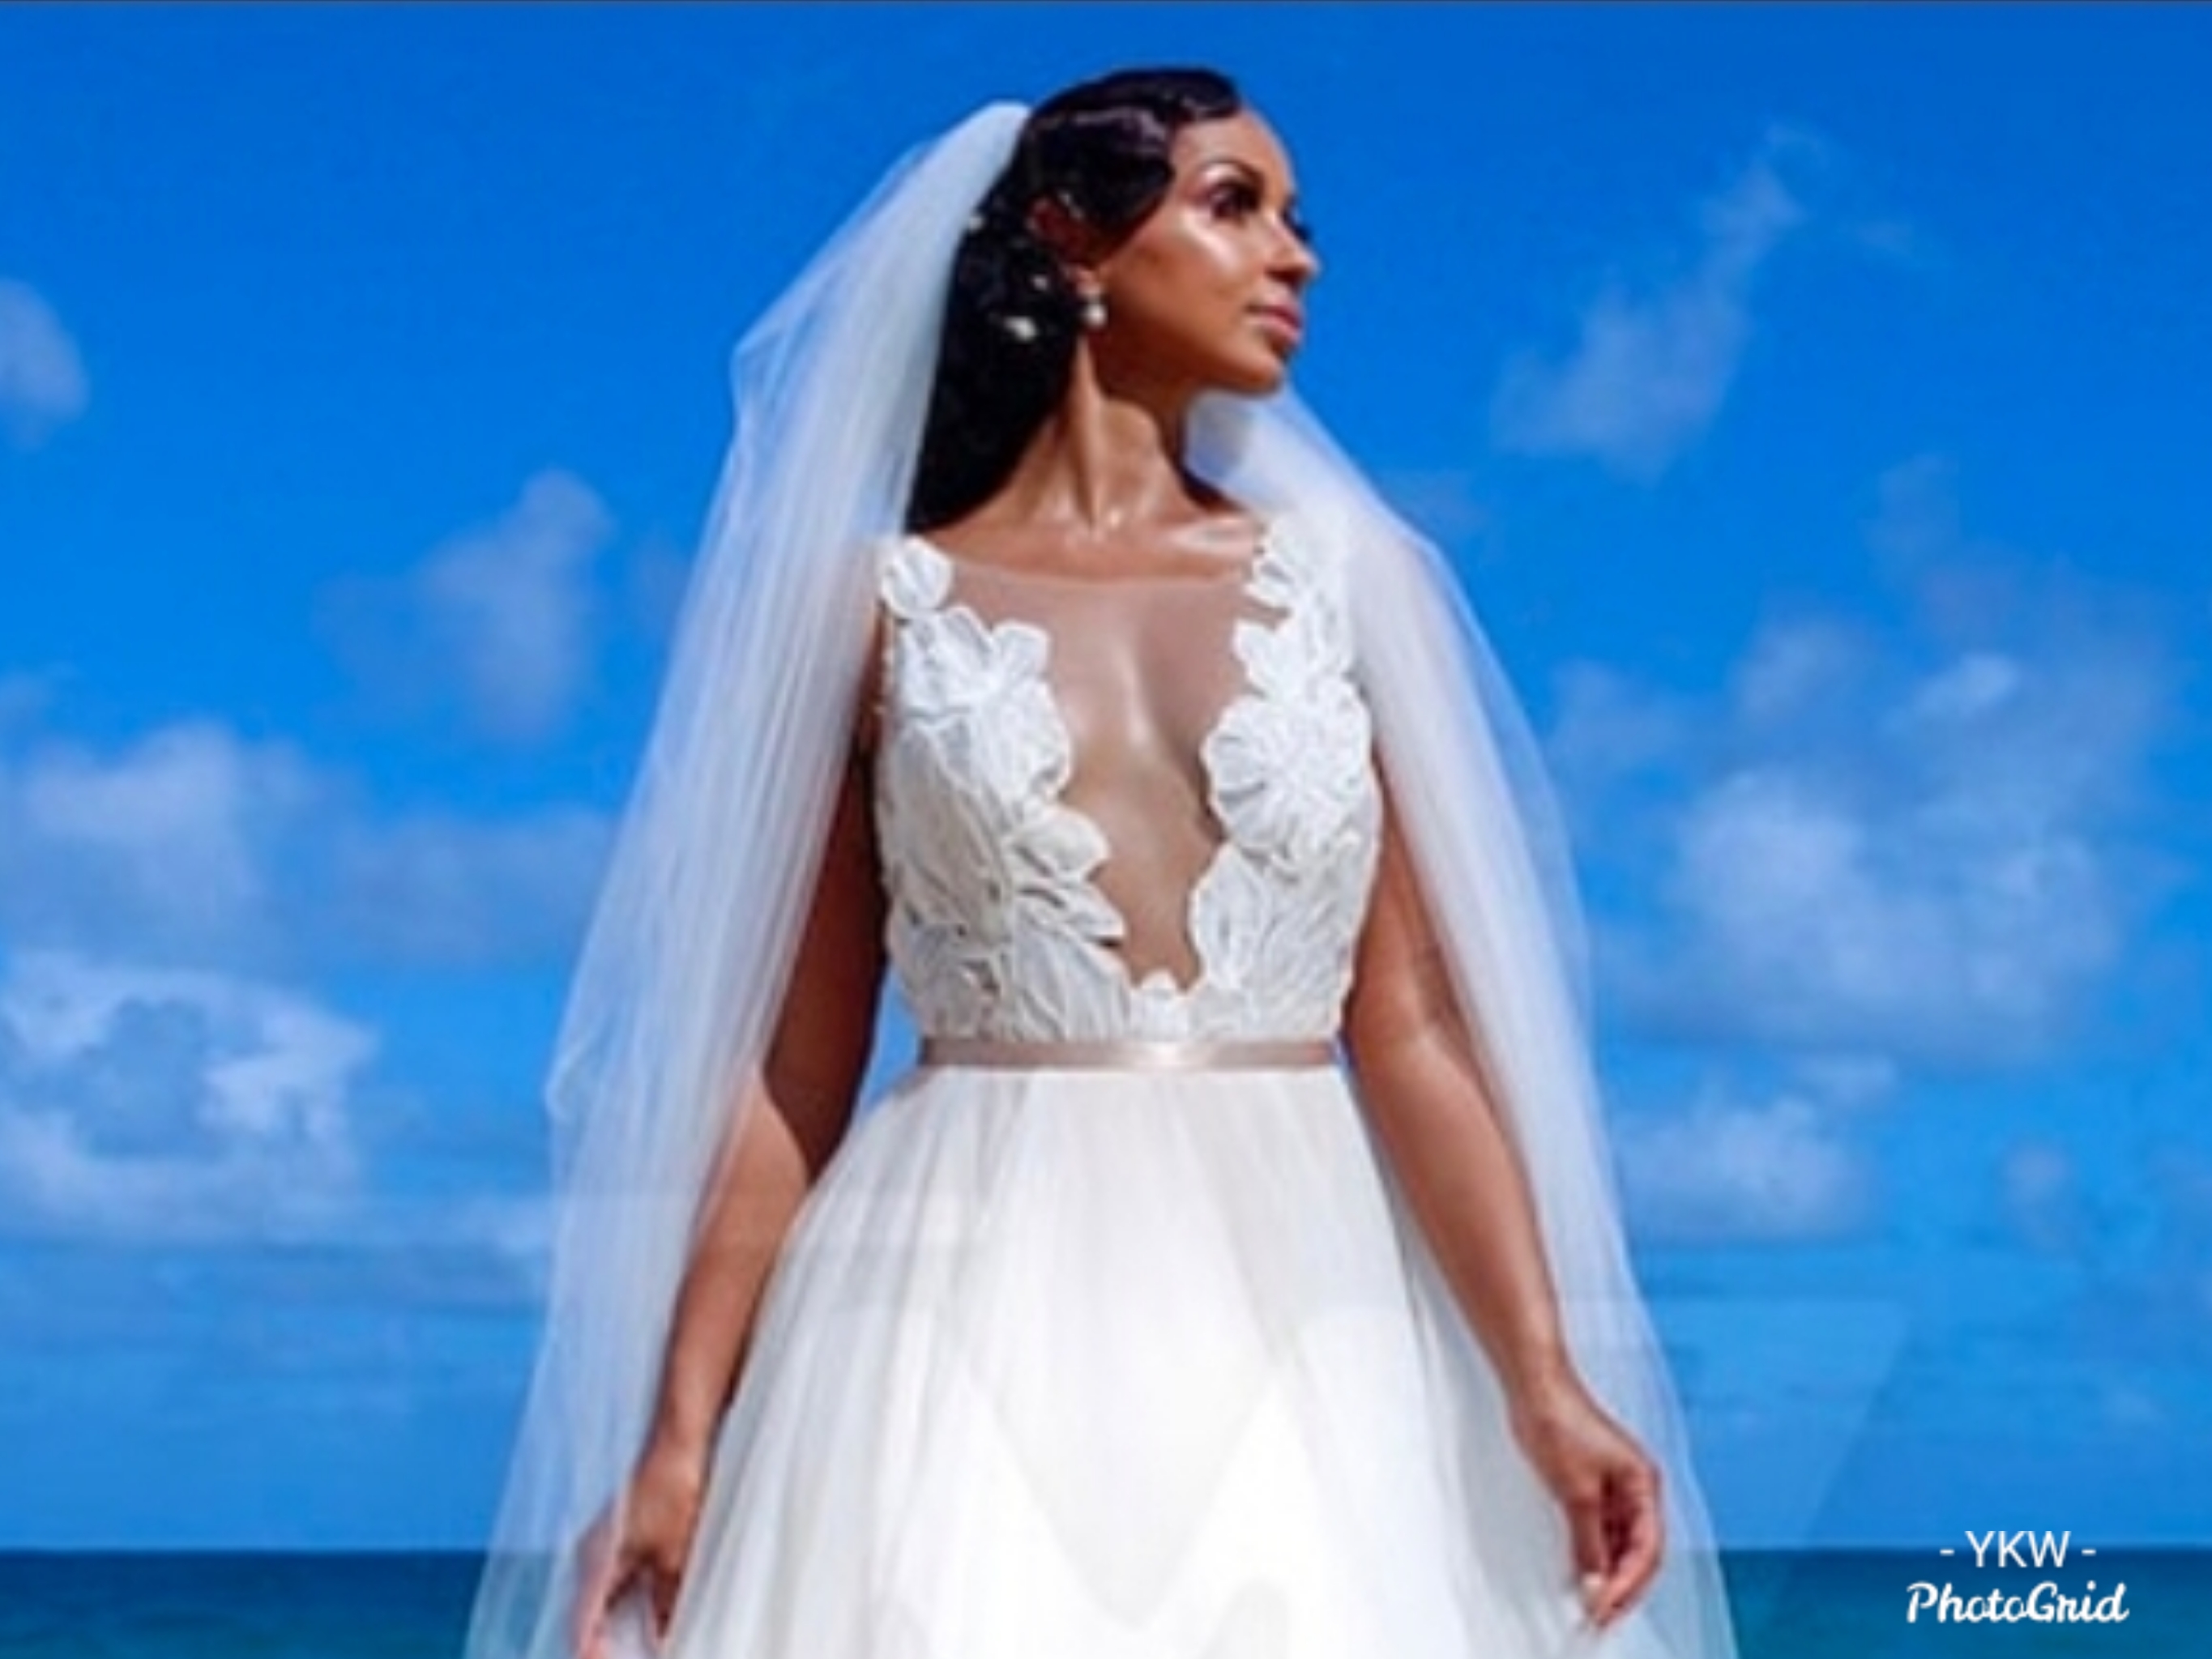 Mya Reveals She Does Not Have A Groom But Married Herself, Promoting New Music Video “The Truth”